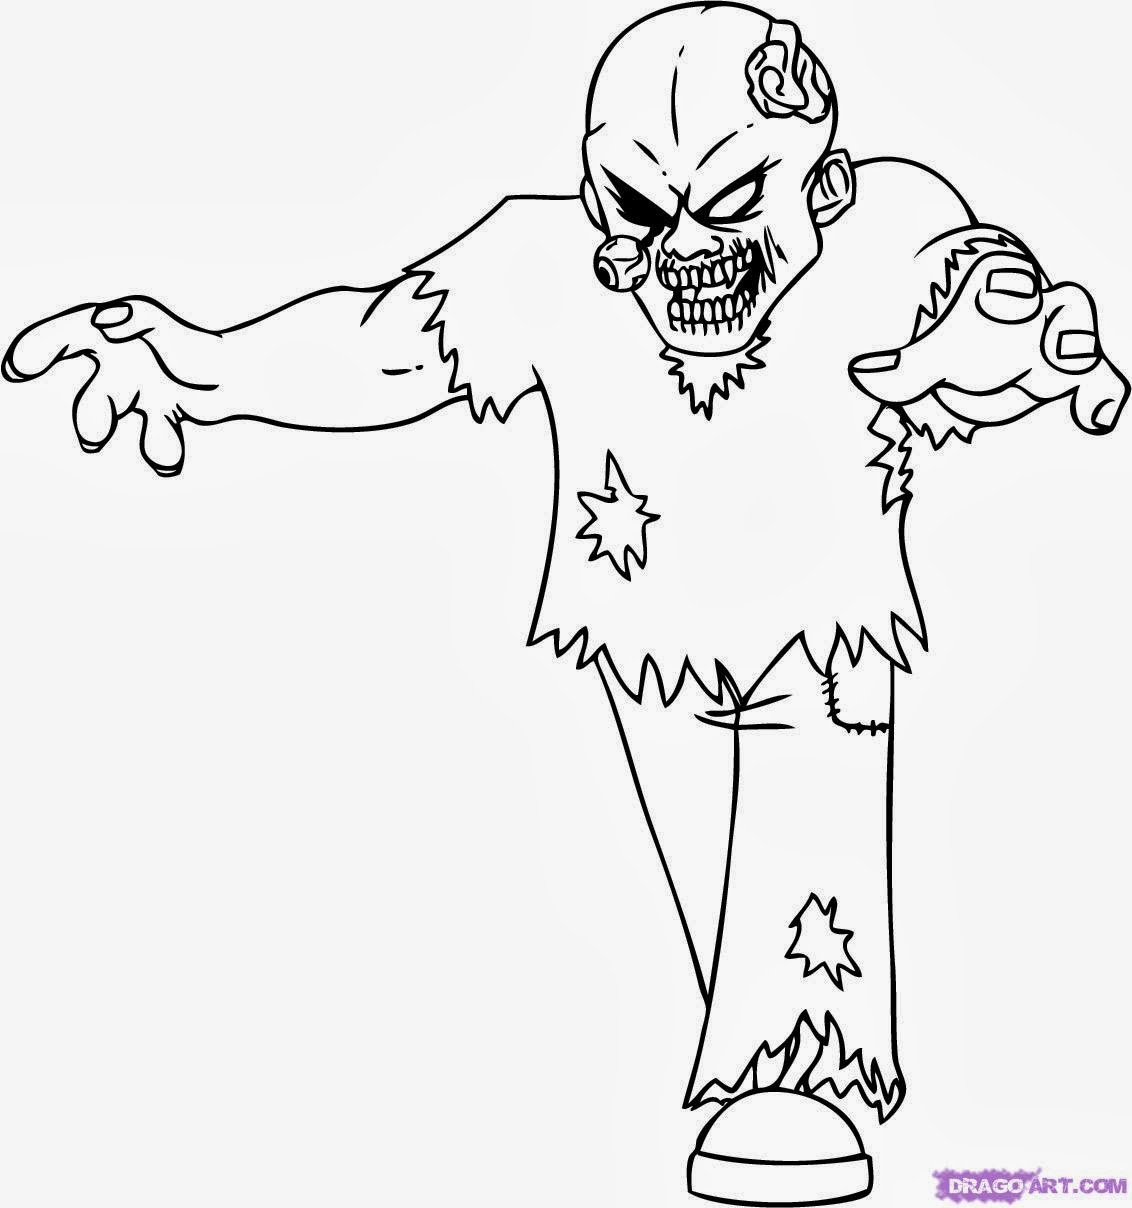 Plant vs Zombie Halloween Coloring Pages